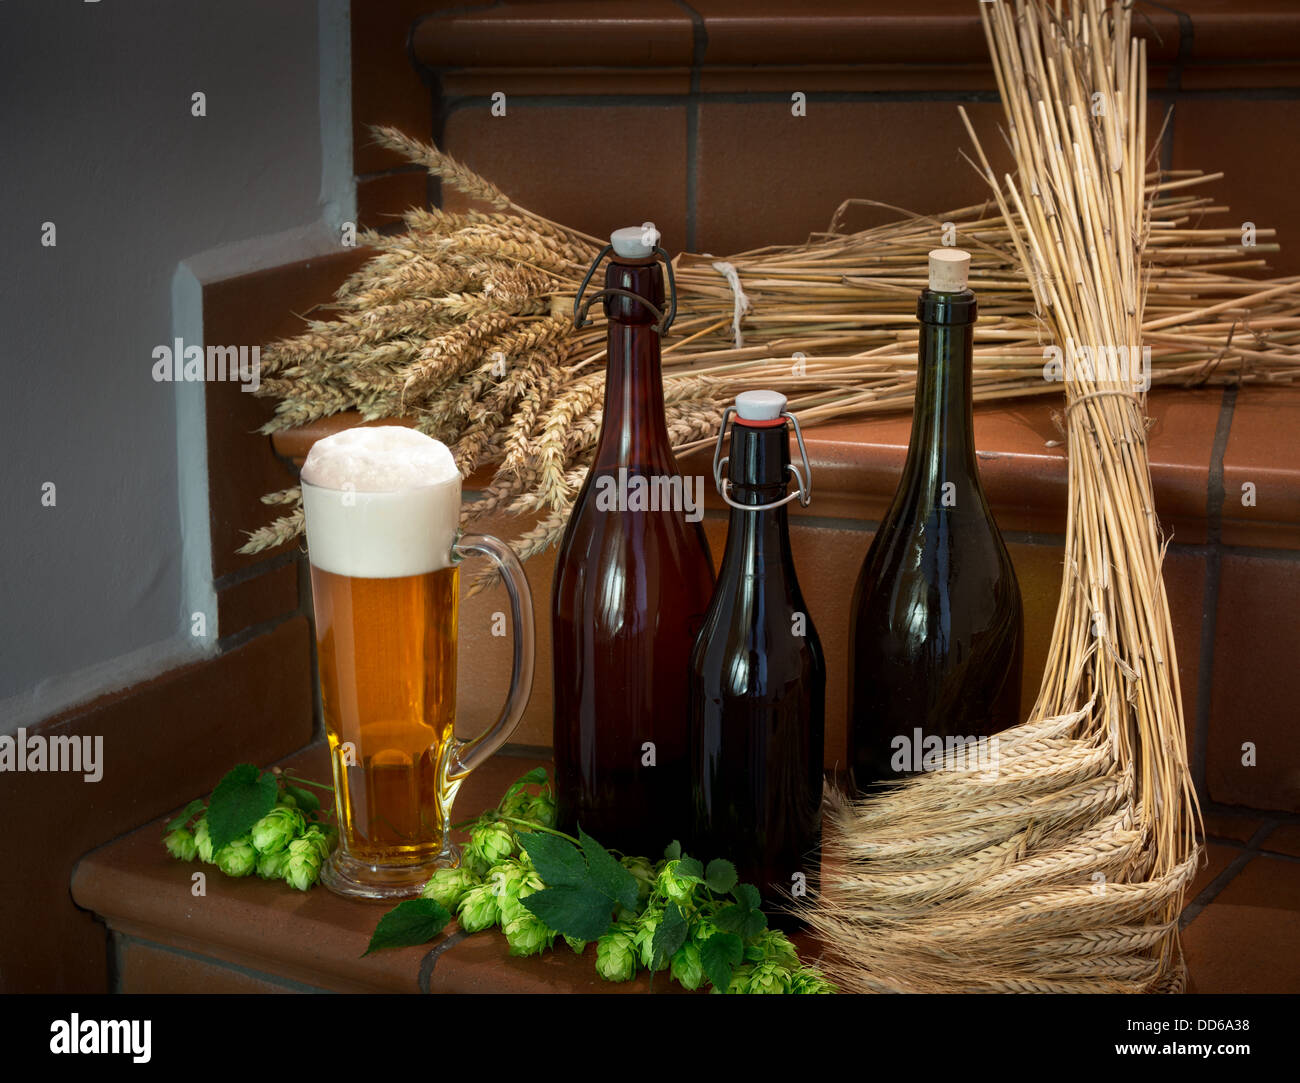 still life with bottles and raw material for beer production Stock Photo